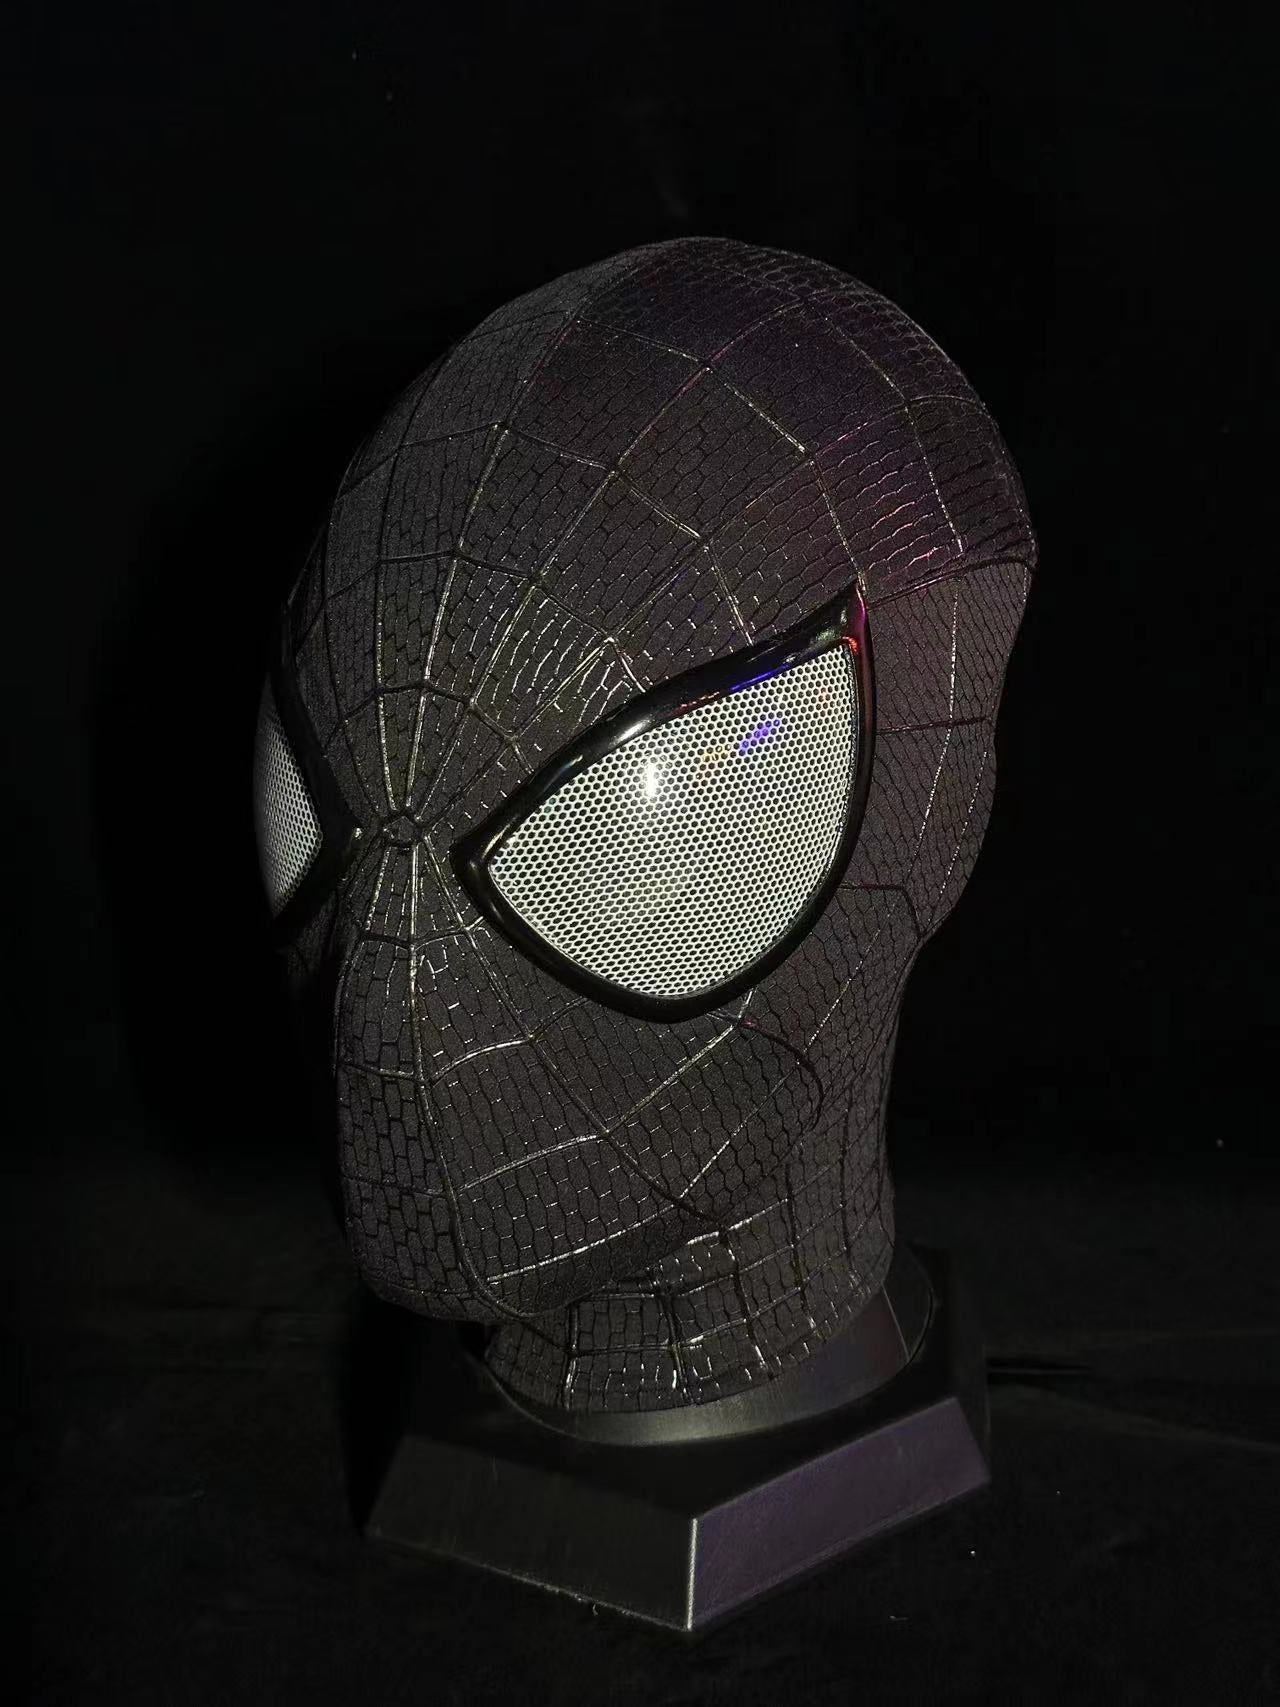 The V4 Symbiote TASM2 with Faceshell and Lenses Wearable Movie Prop Replica (Adult)